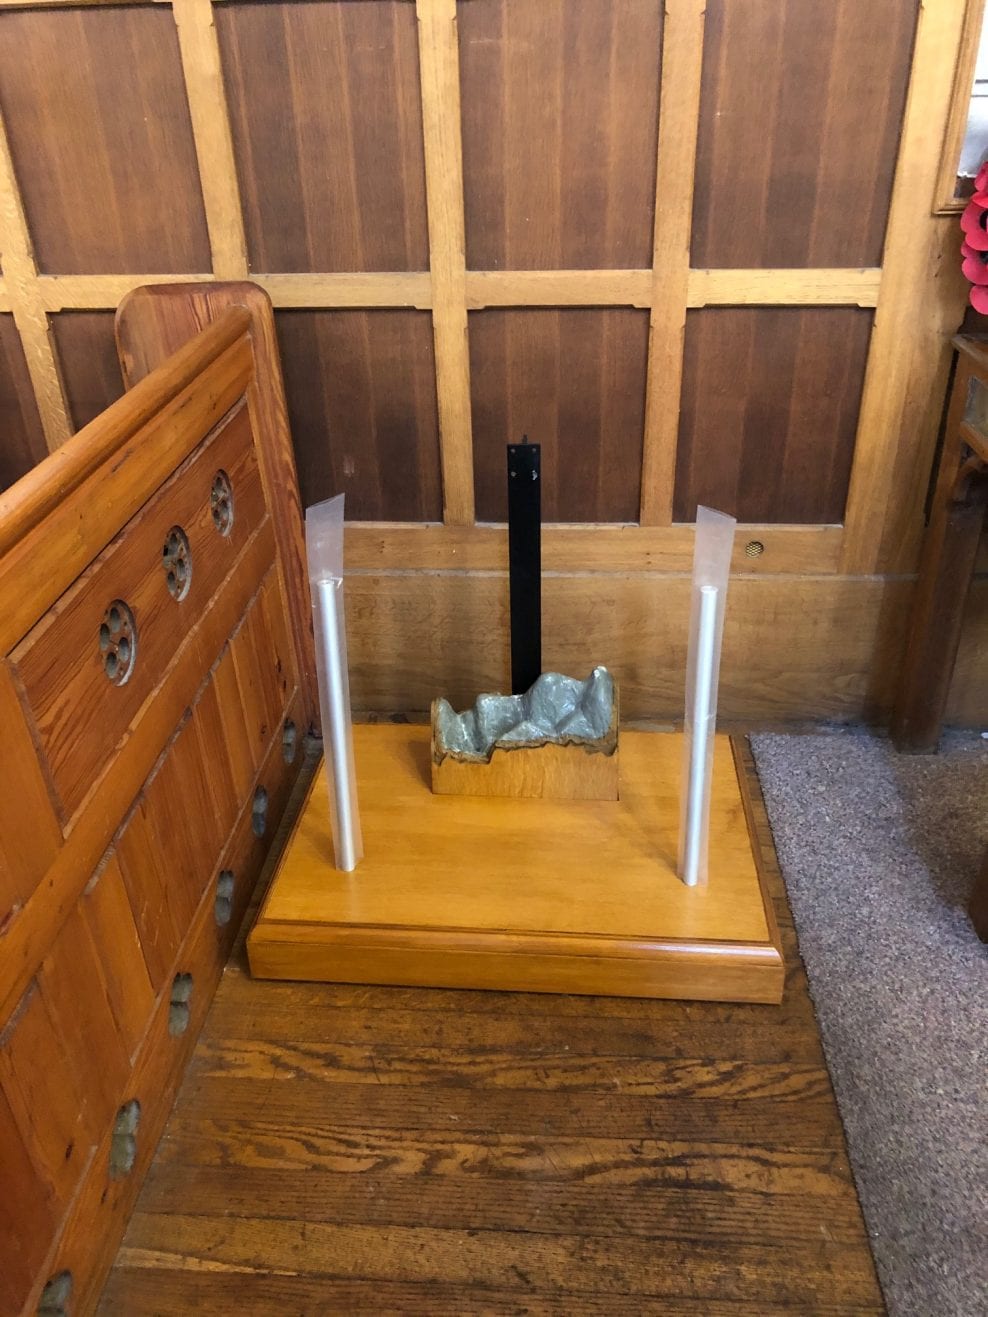 Conservation and mounting of WWI memorial cross, St. Margaret’s Church, Cliffe